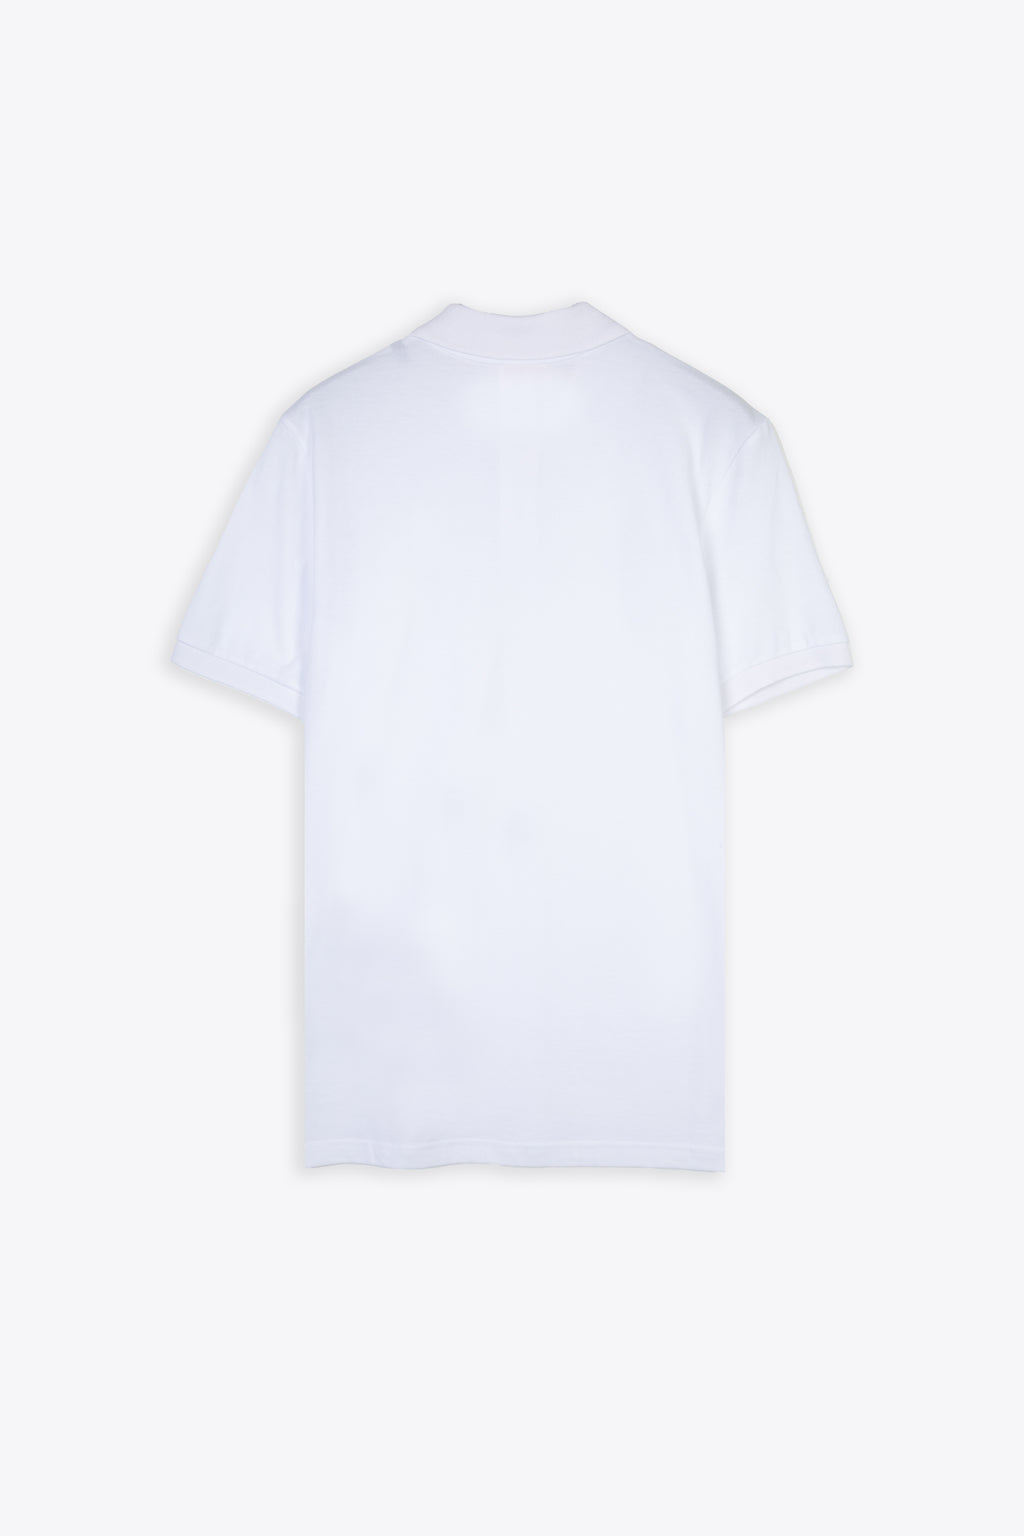 alt-image__White-polo-shirt-with-Oval-D-logo-patch---T-Smith-Doval-Pj
